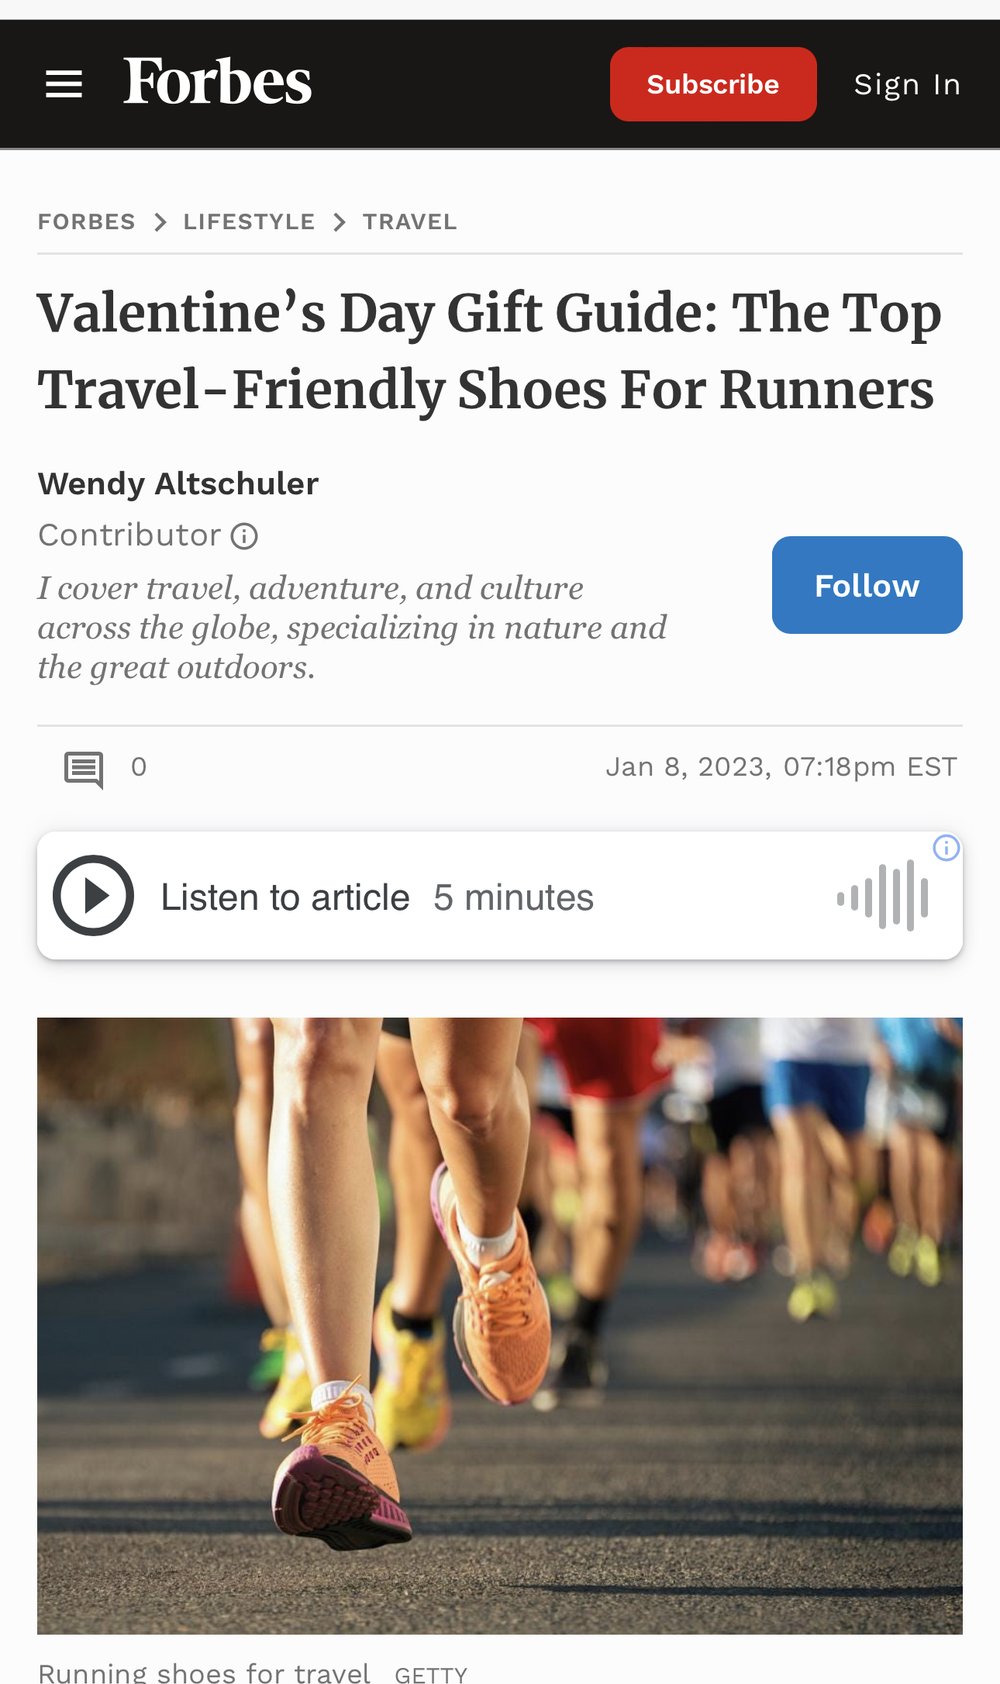 Valentine’s Day Gift Guide: The Top Travel-Friendly Shoes For Runners